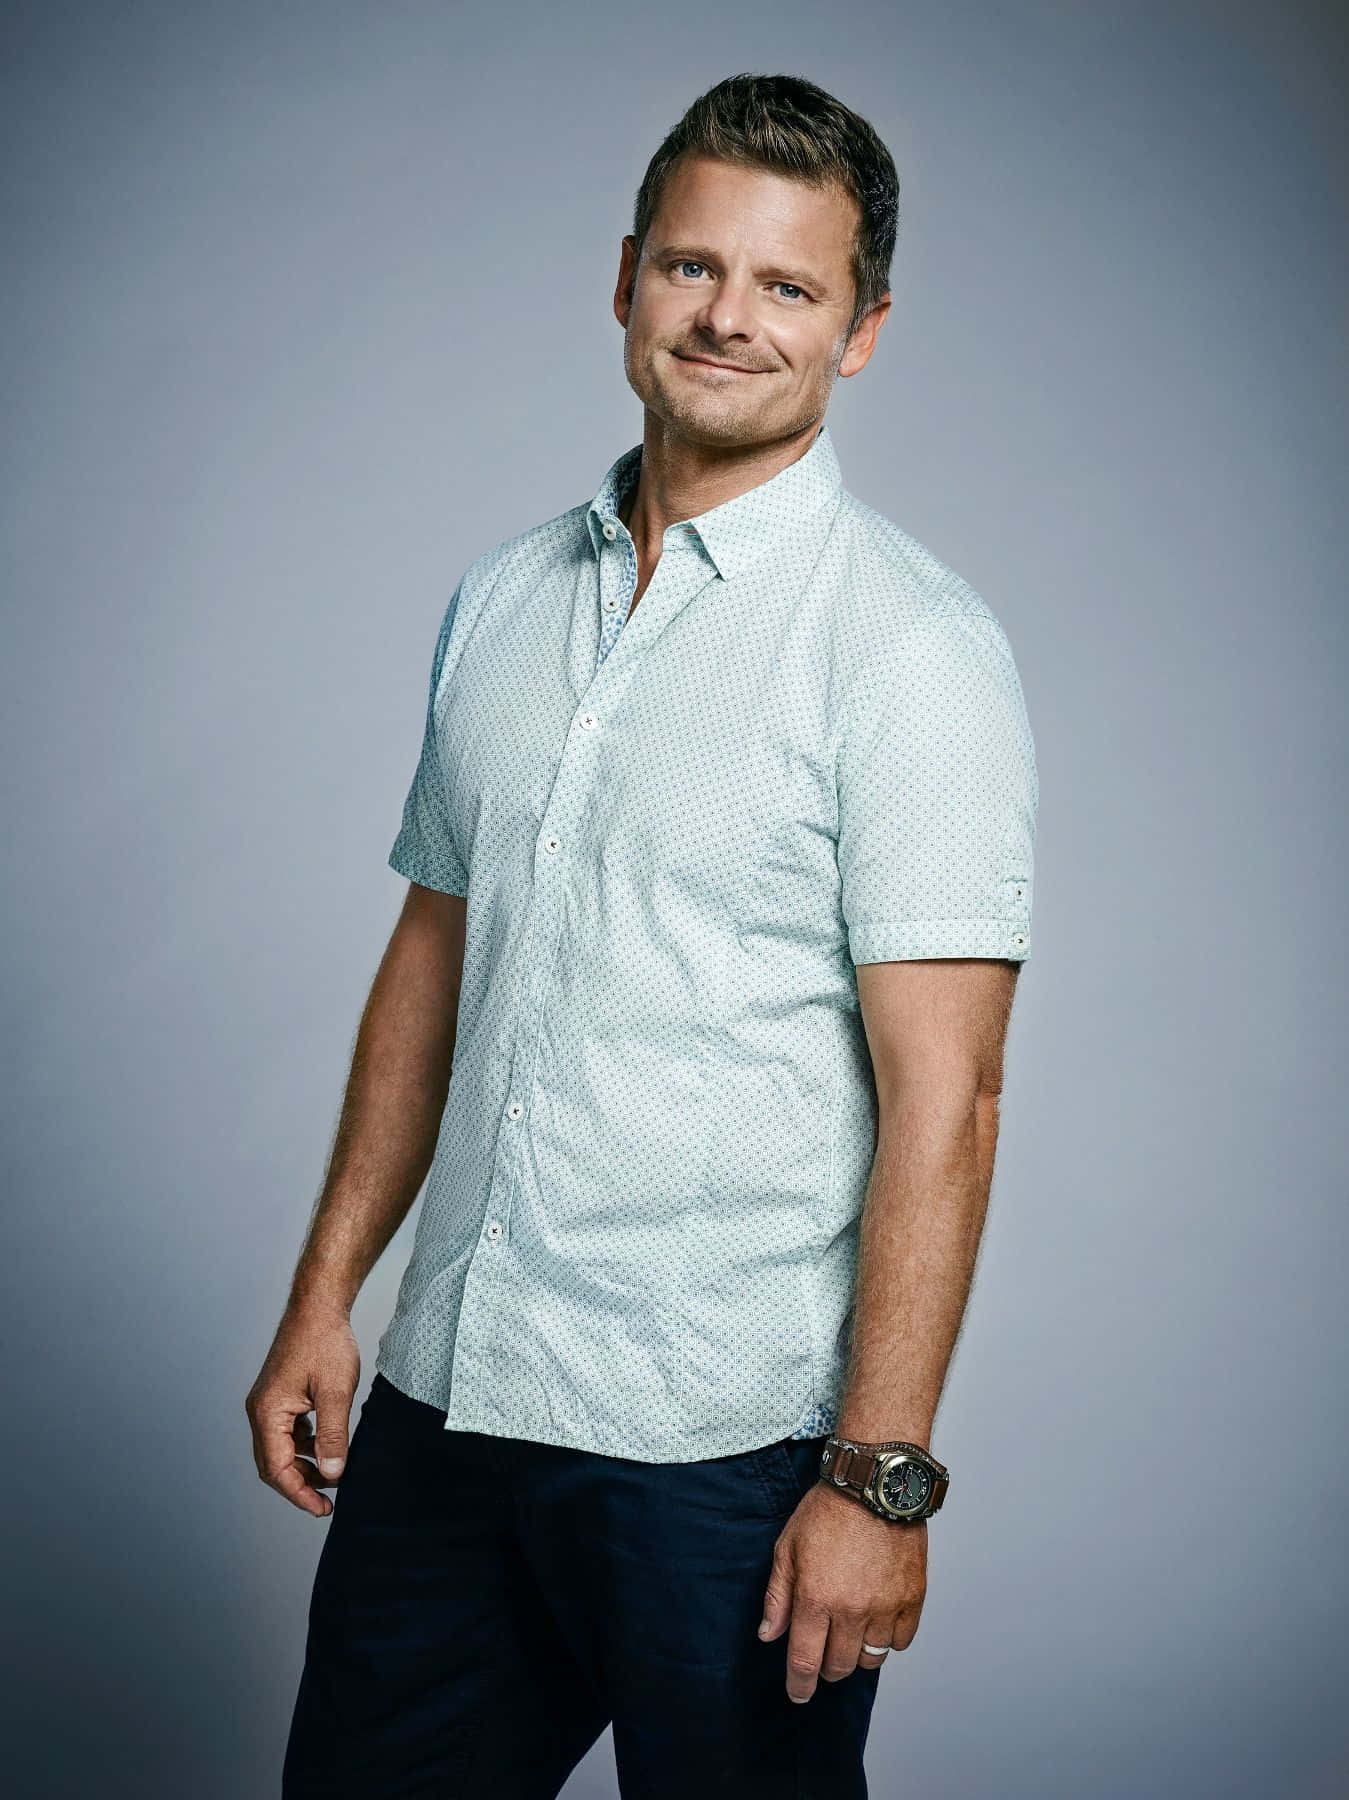 Steve Zahn, an American actor known for his comedic roles. Wallpaper